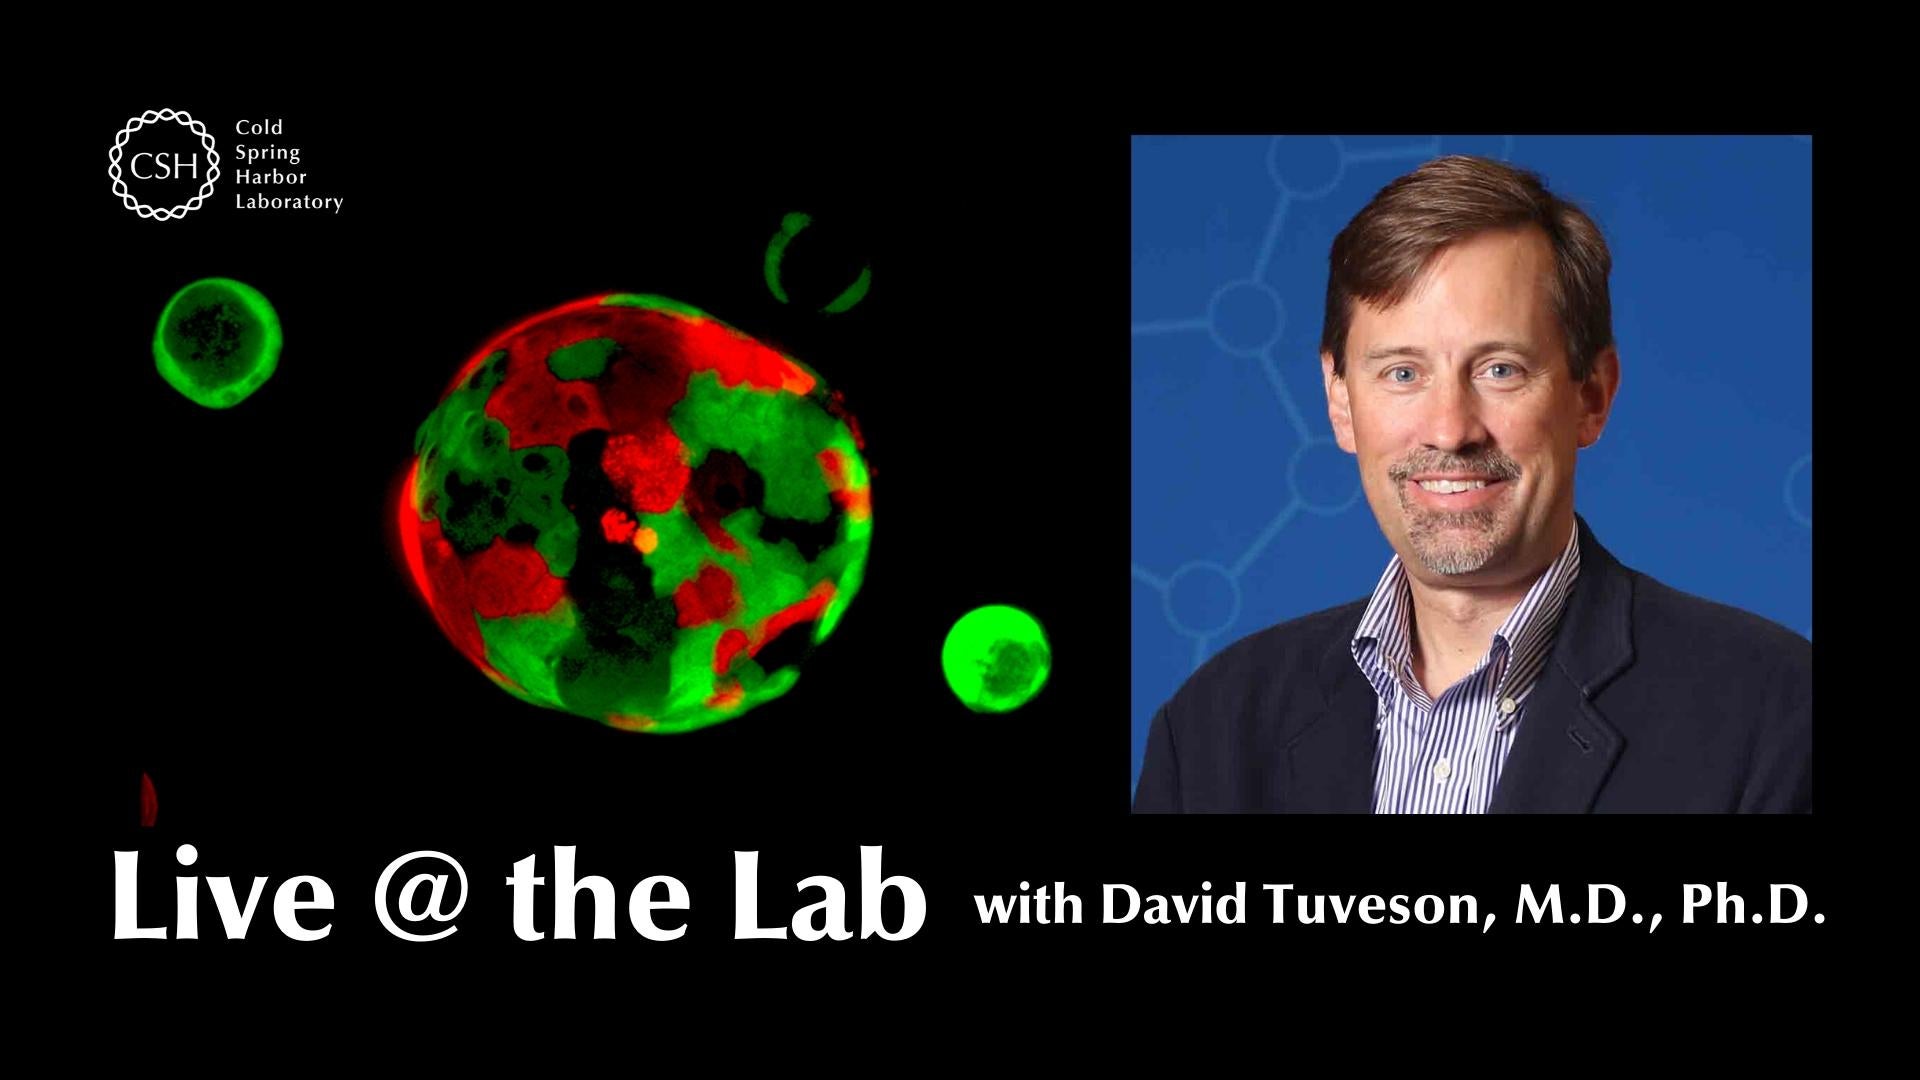 Hero image with organoid and Dr. David Tuveson for Live @ the Lab